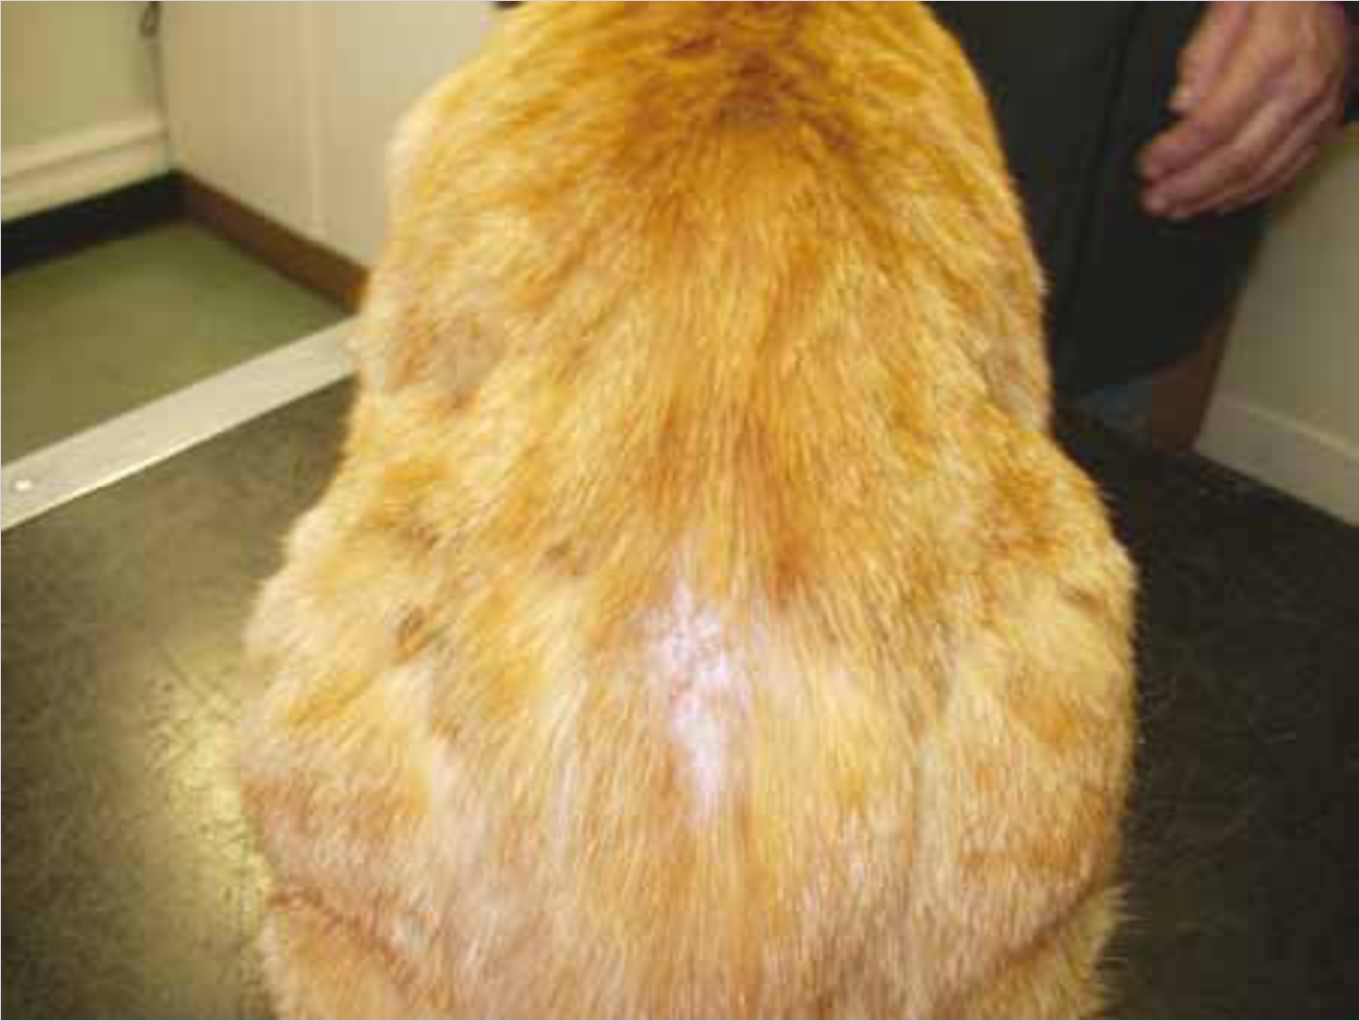 A picture of a dog with lesions on its back